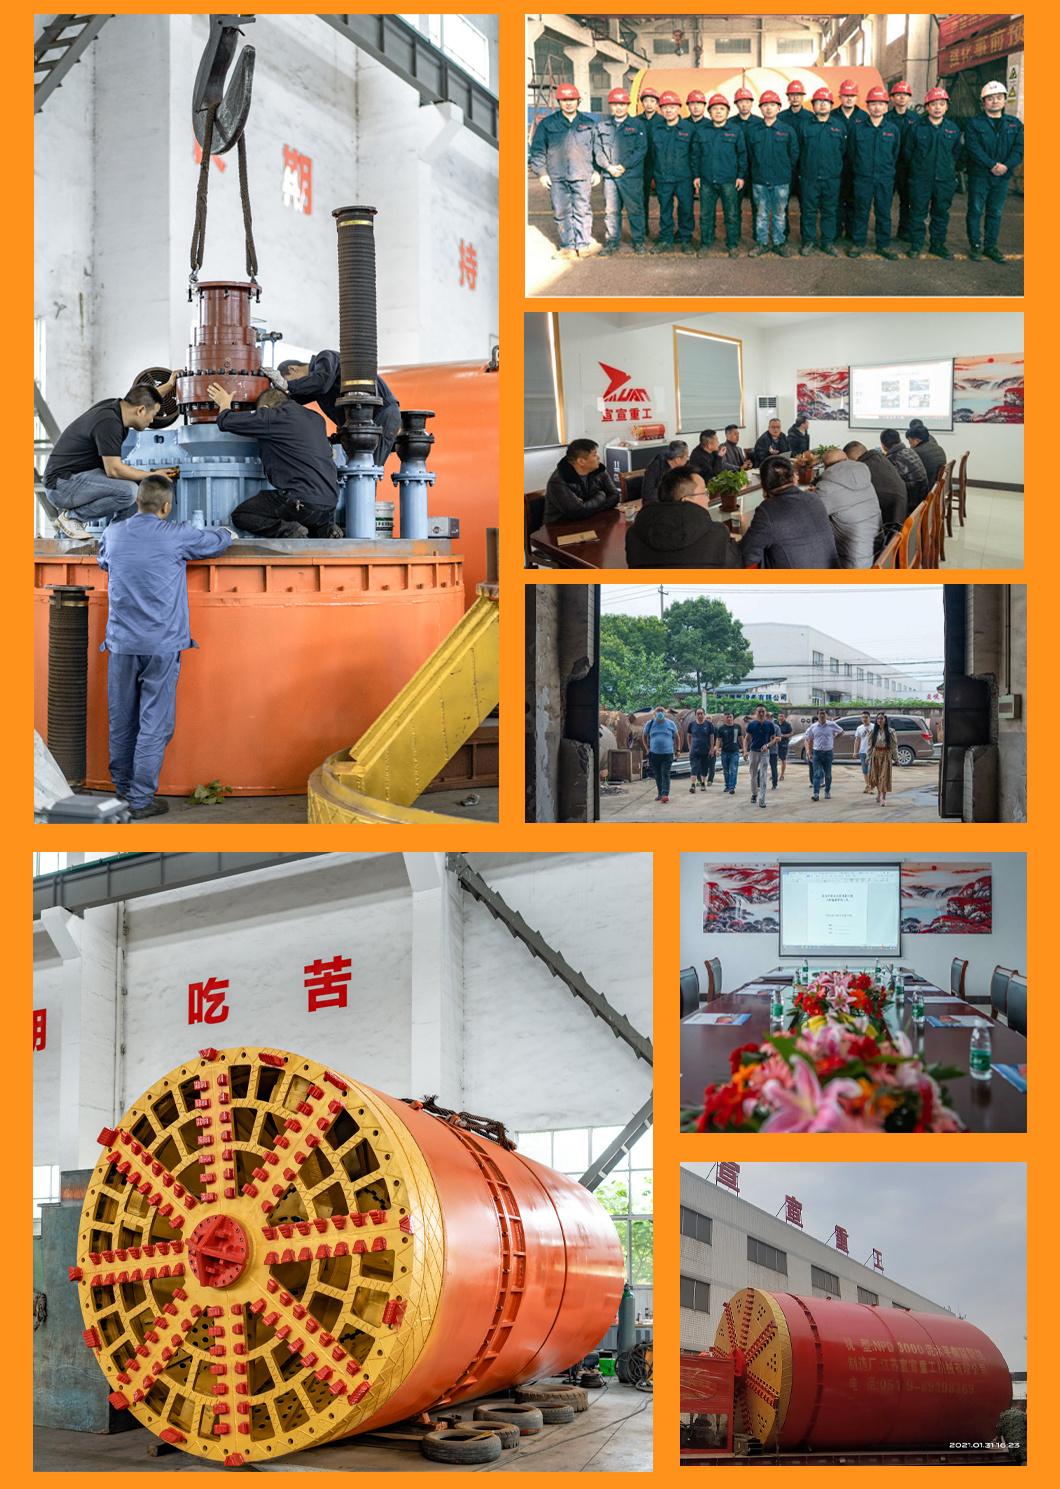 Trenchless Project Ysd3000 Rock Pipe Jacking Machine for Rcc Jacking Machine